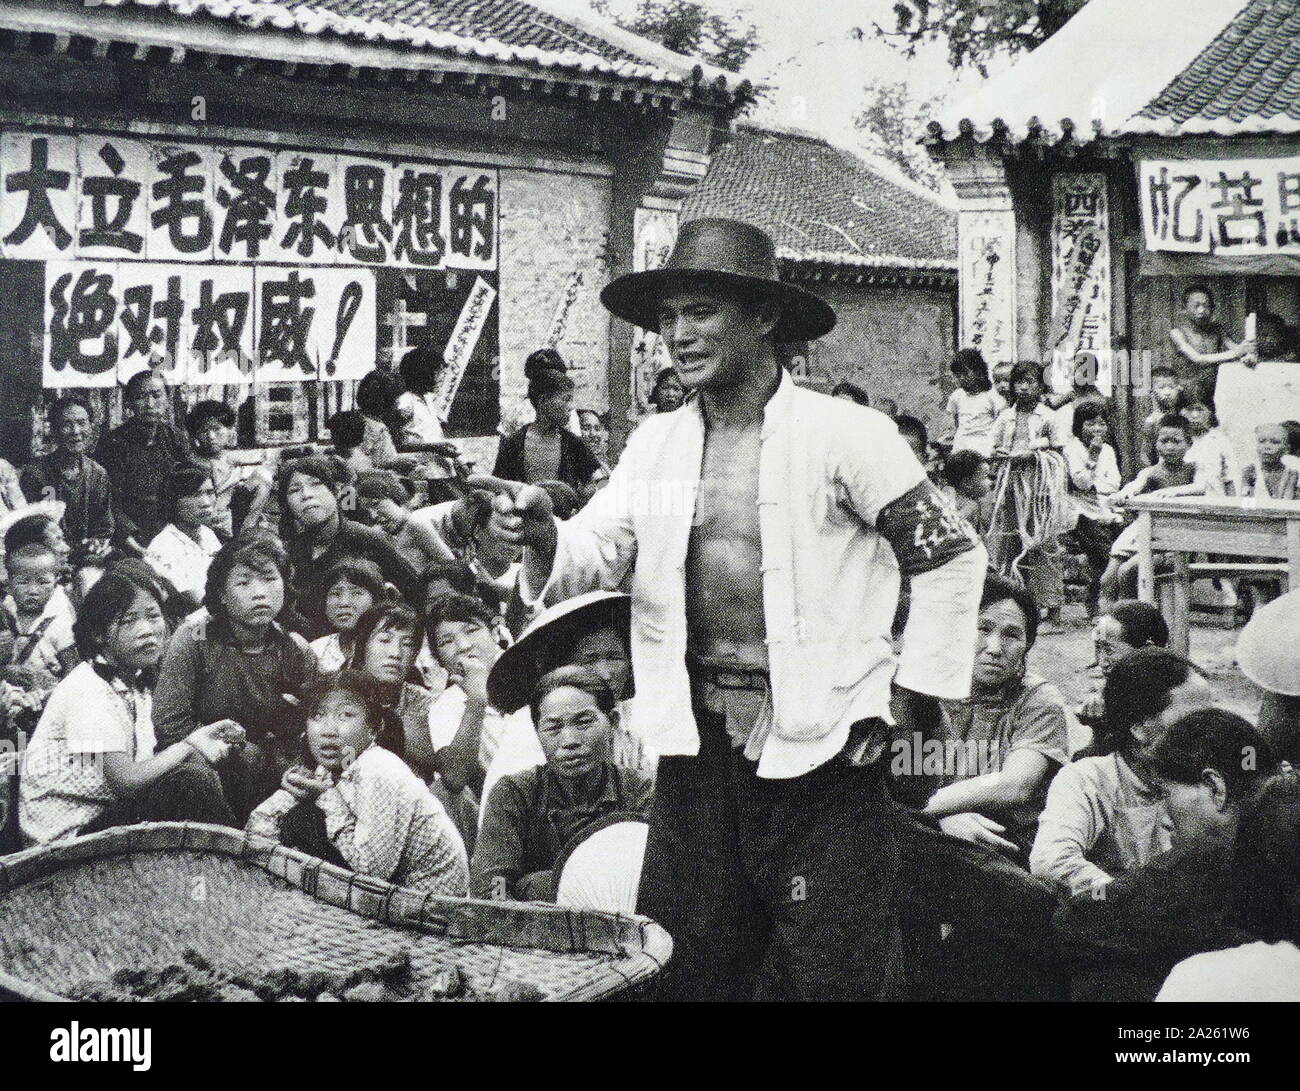 villagers radicalised during the Cultural Revolution China 1966 Stock Photo